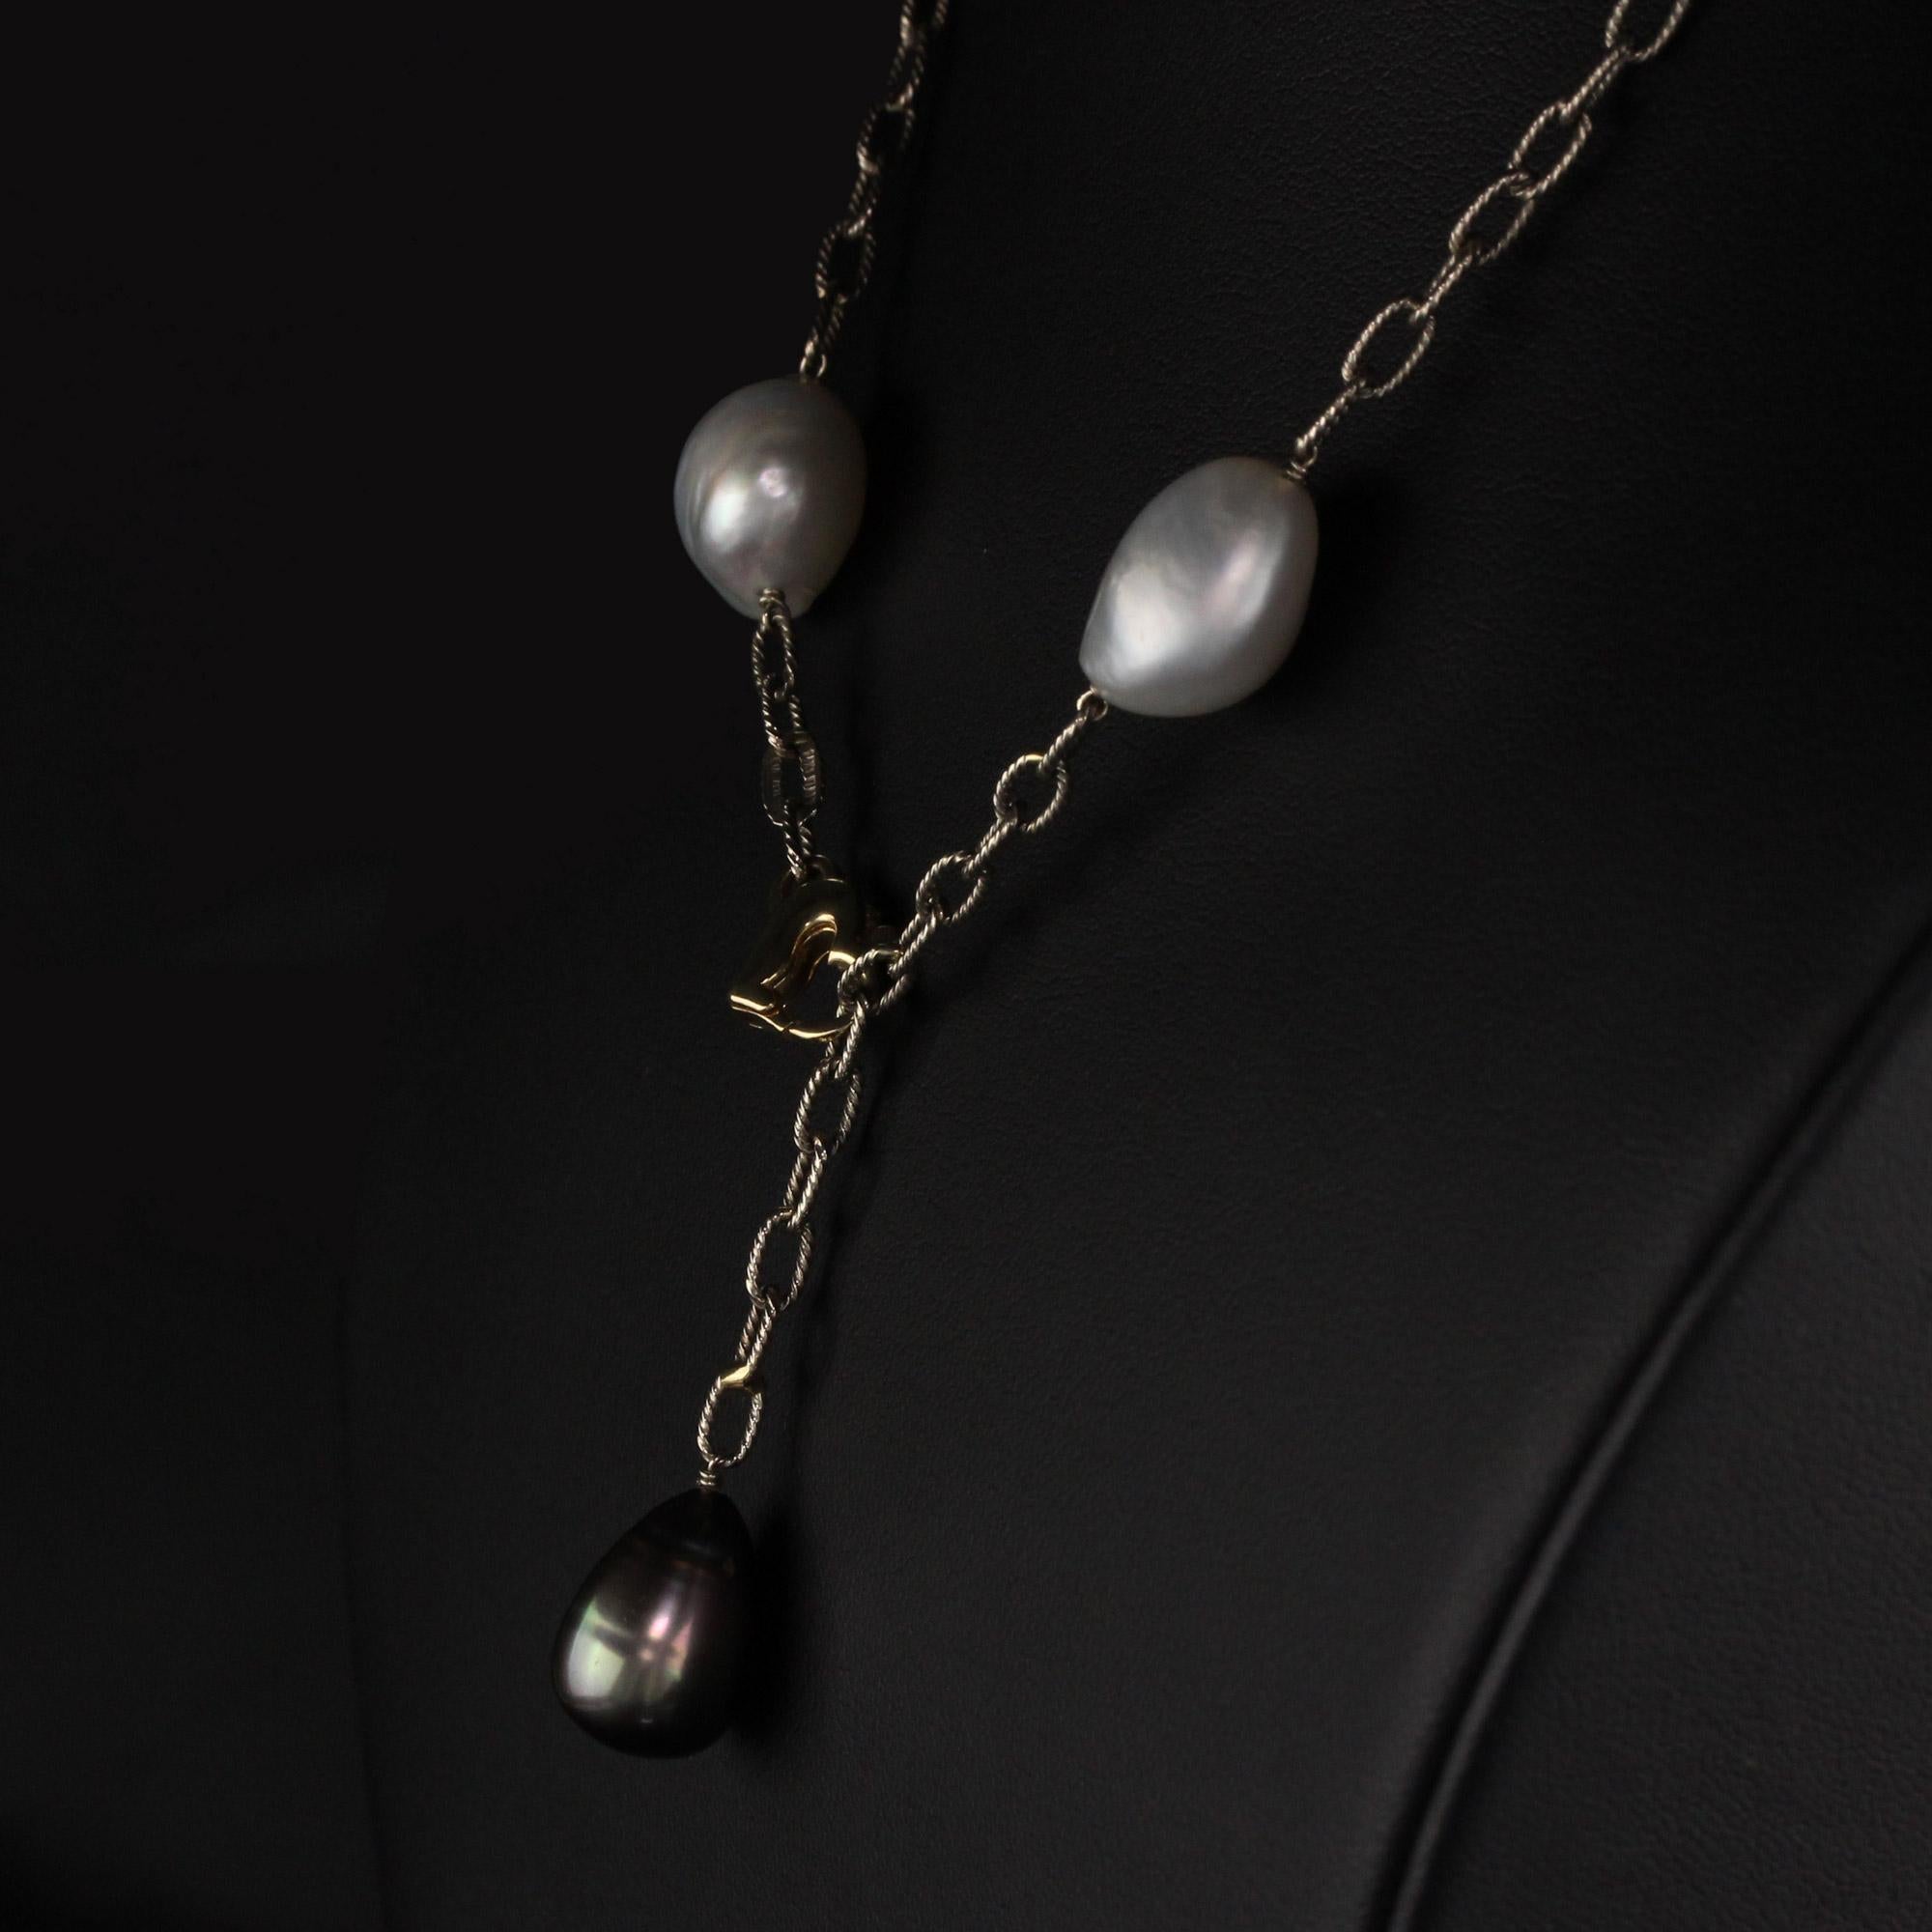 Modern Vintage Estate 14 Karat White Gold Tahitian and South Sea Pearl Necklace For Sale